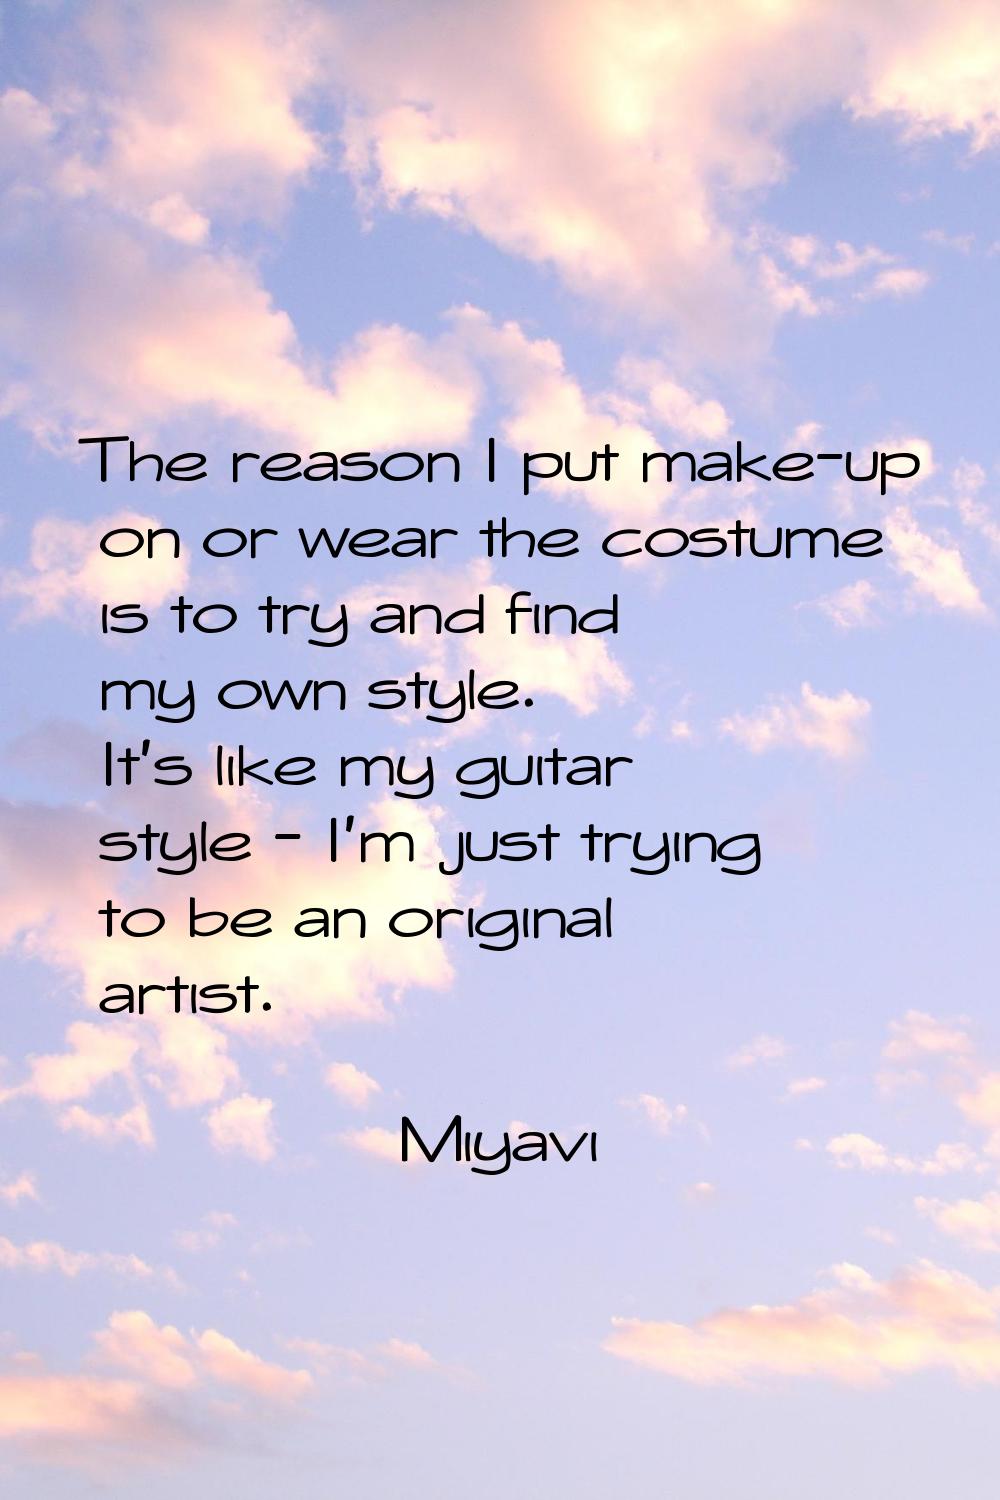 The reason I put make-up on or wear the costume is to try and find my own style. It's like my guita